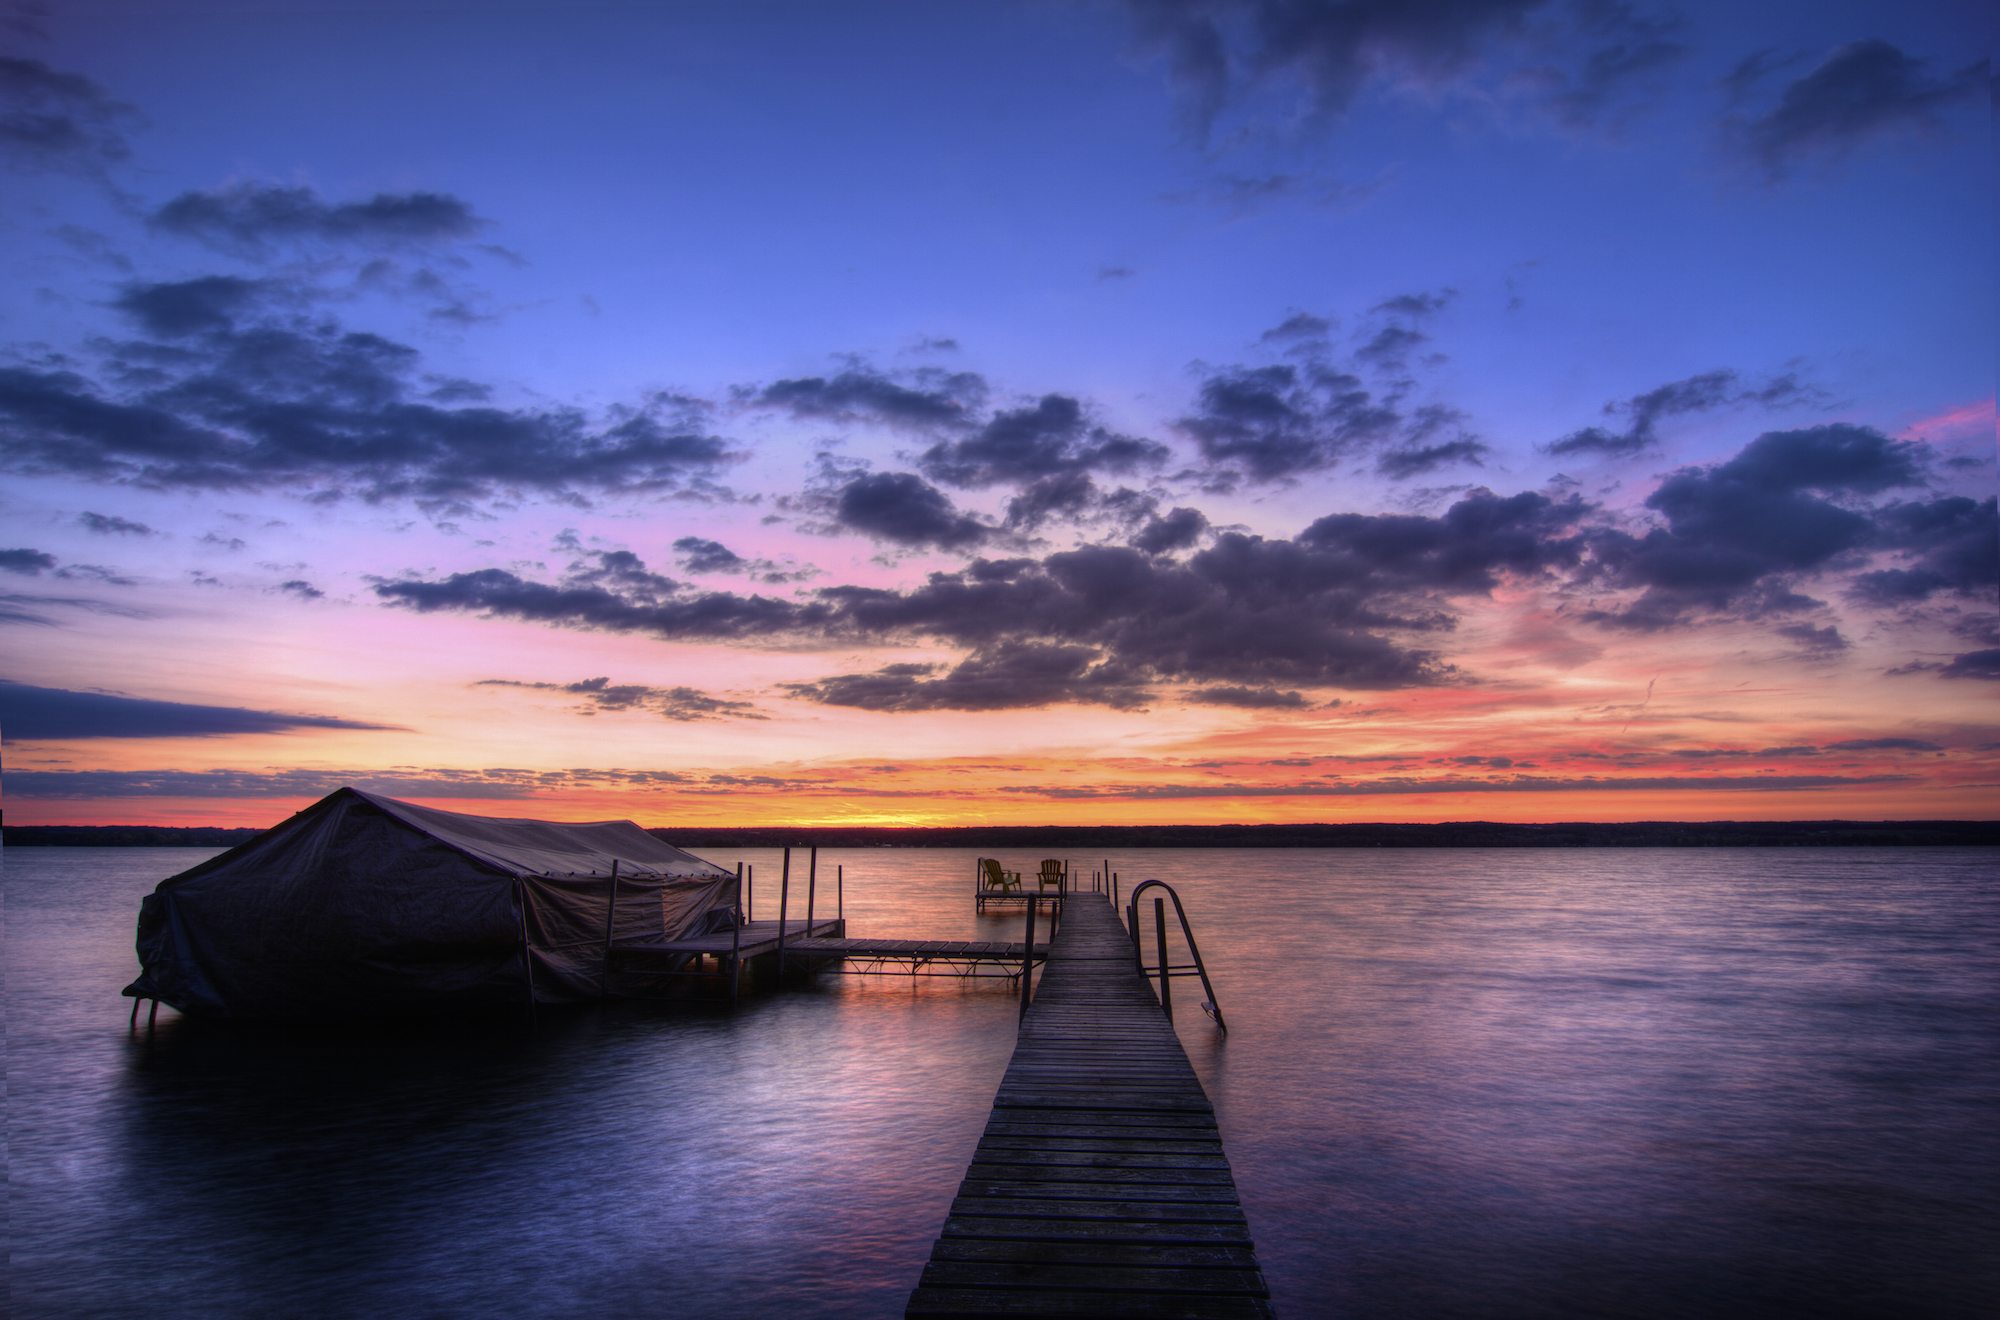 Fall in Love with the Finger Lakes (Don’t Say We Didn’t Warn You)